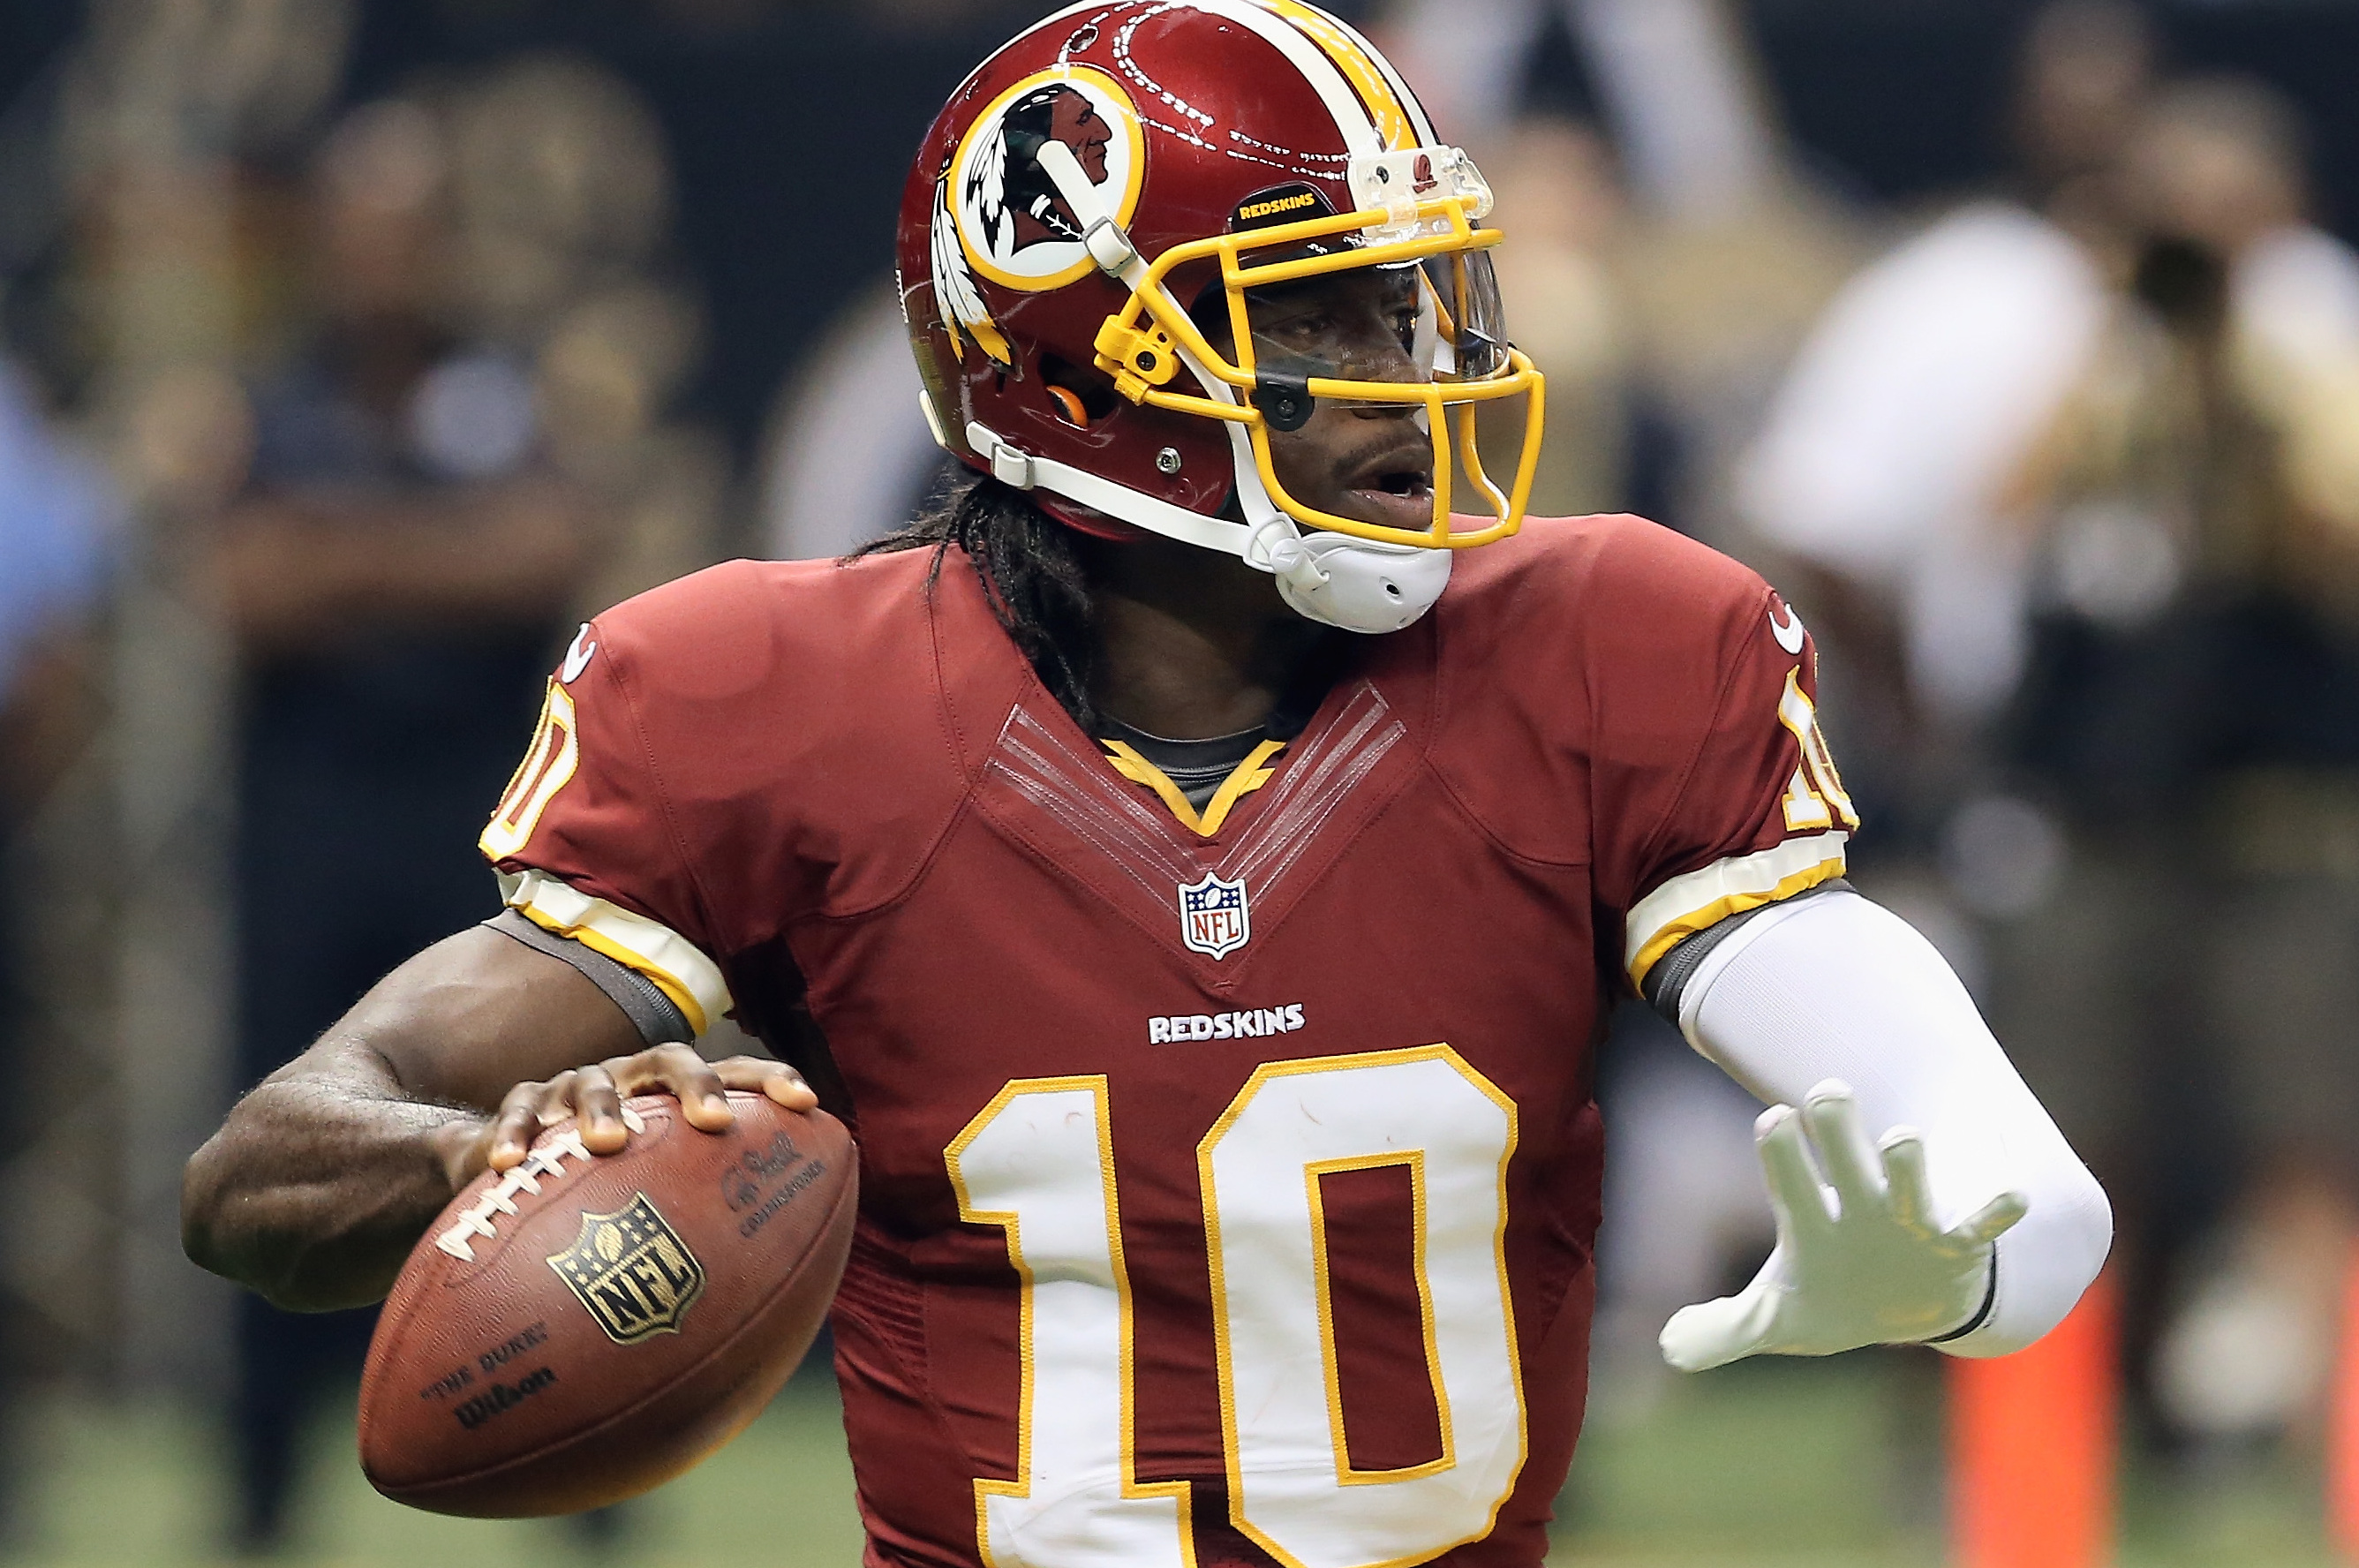 Robert Griffin III Jersey Is NFL's Best-Selling in Recorded